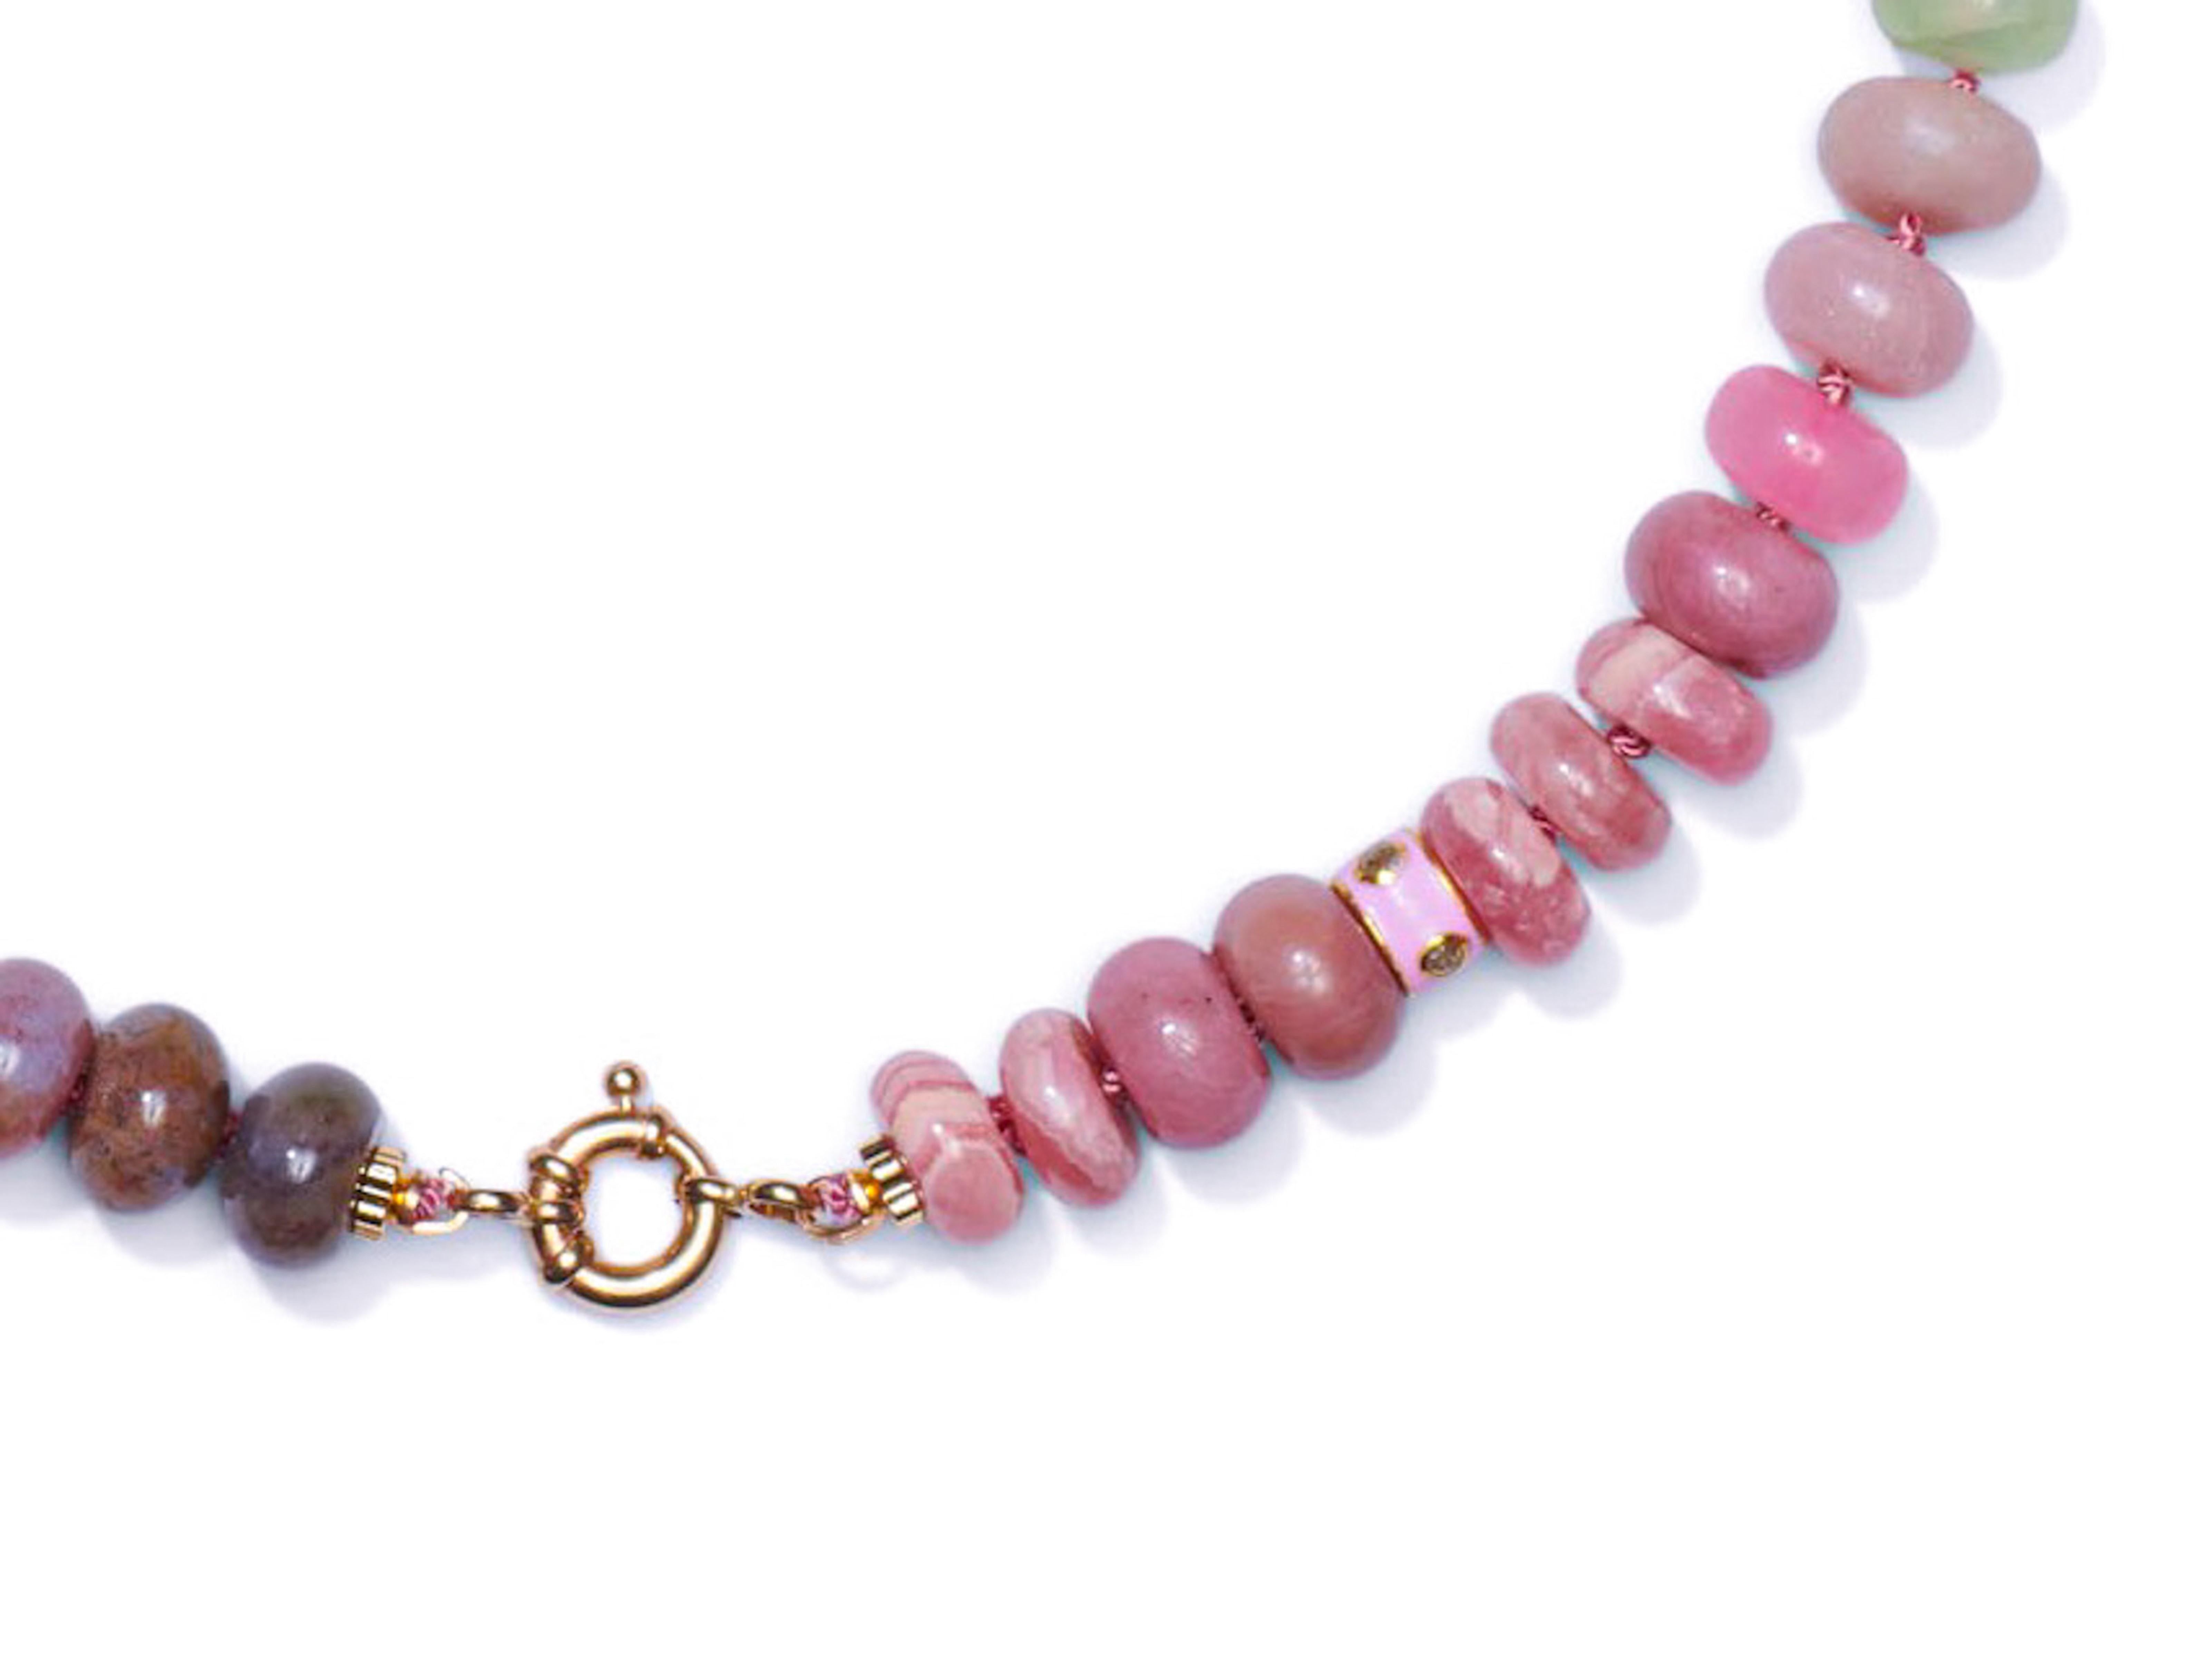 Exquisite precious gemstone beaded necklace enriched with a large variety of gemstones such as:

• Ethiopian opal
• Peridot
• Lace Agate
• Aventurine
• Kunzite
• Pink opal
• Strawberry quartz
• Rose quartz
• Aventurines
• Argentinian Rhodochrosite
•